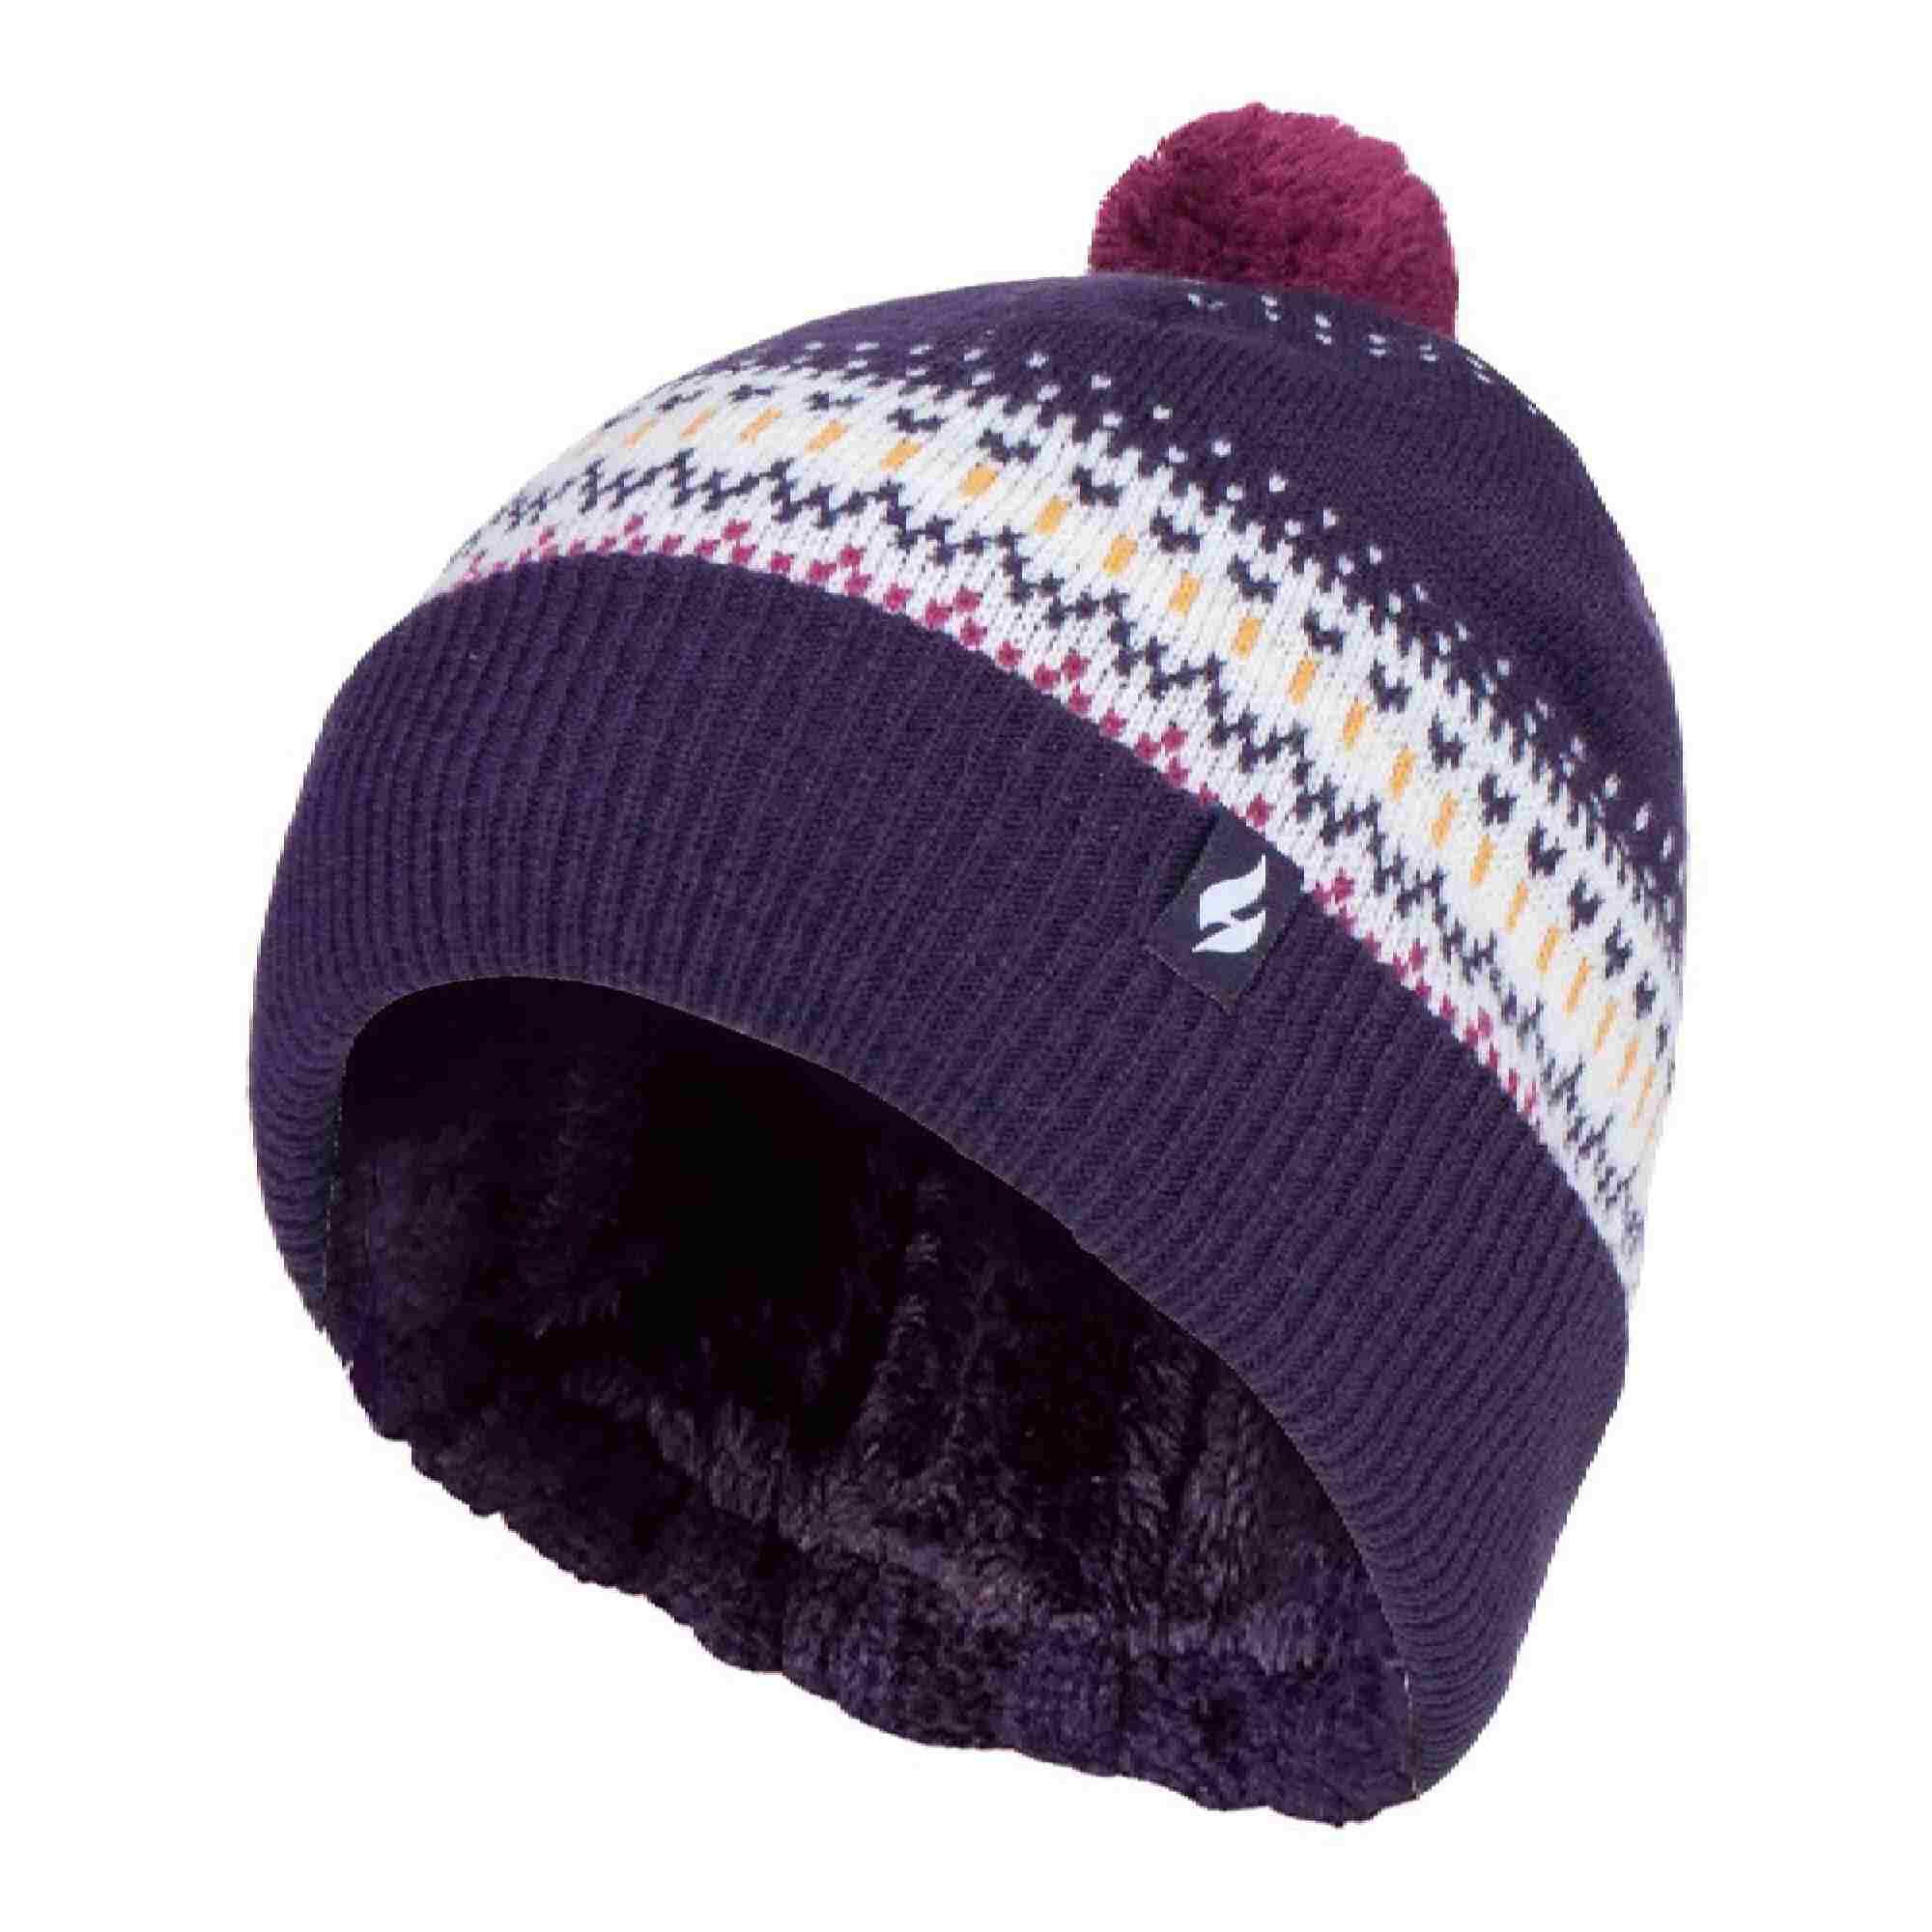 Ladies Knitted Beanie Bobble Hat with Pom Pom 1/7